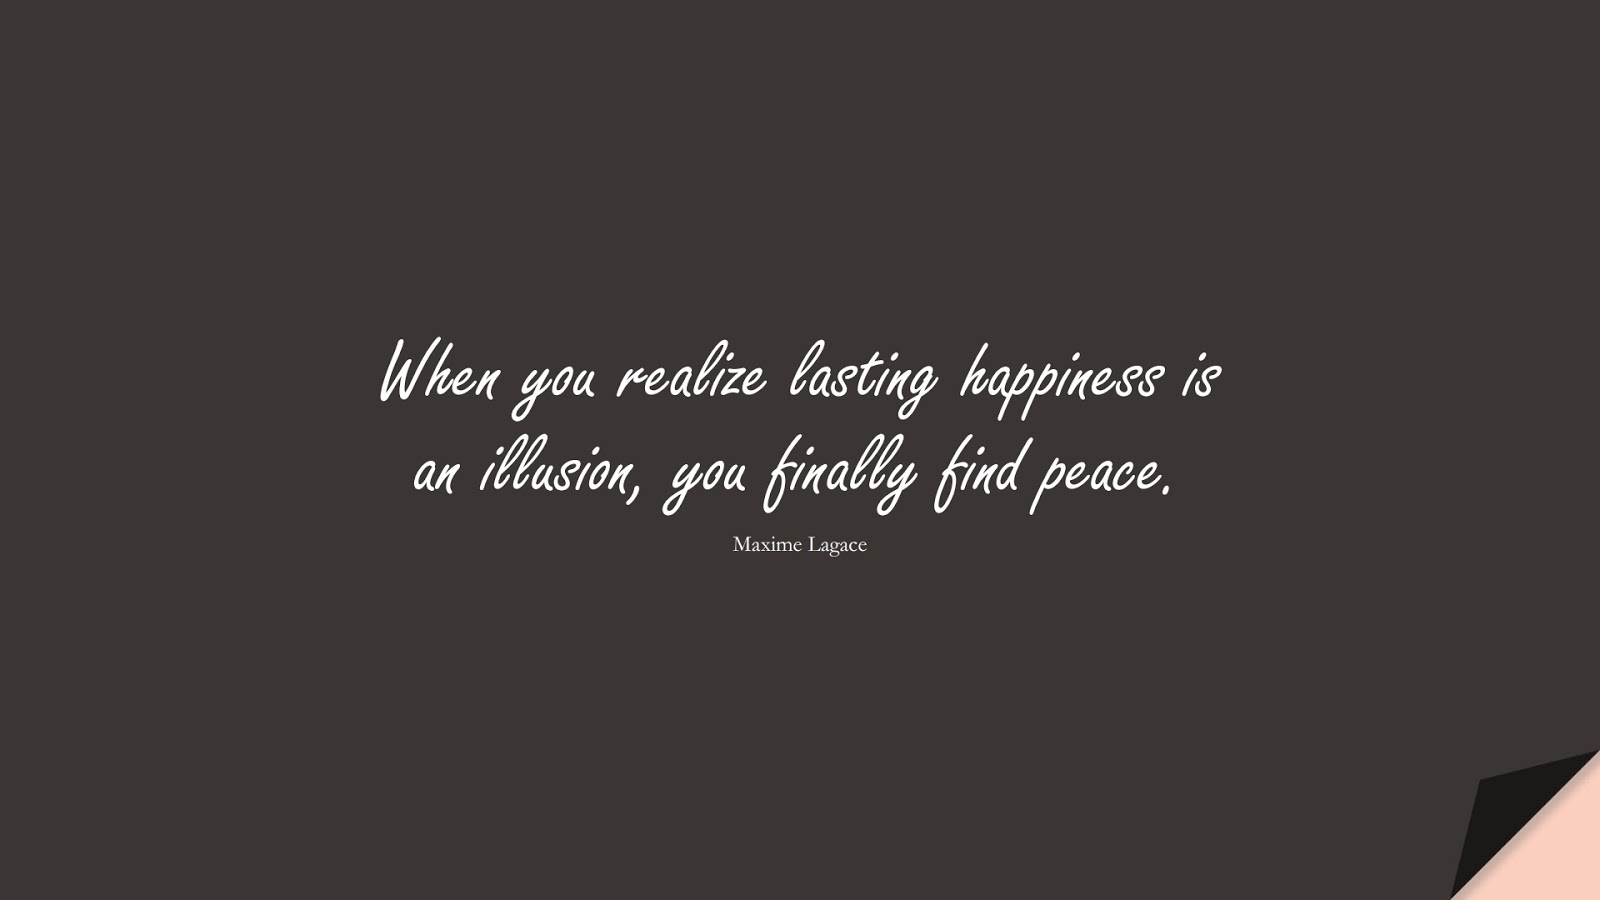 When you realize lasting happiness is an illusion, you finally find peace. (Maxime Lagace);  #CalmQuotes